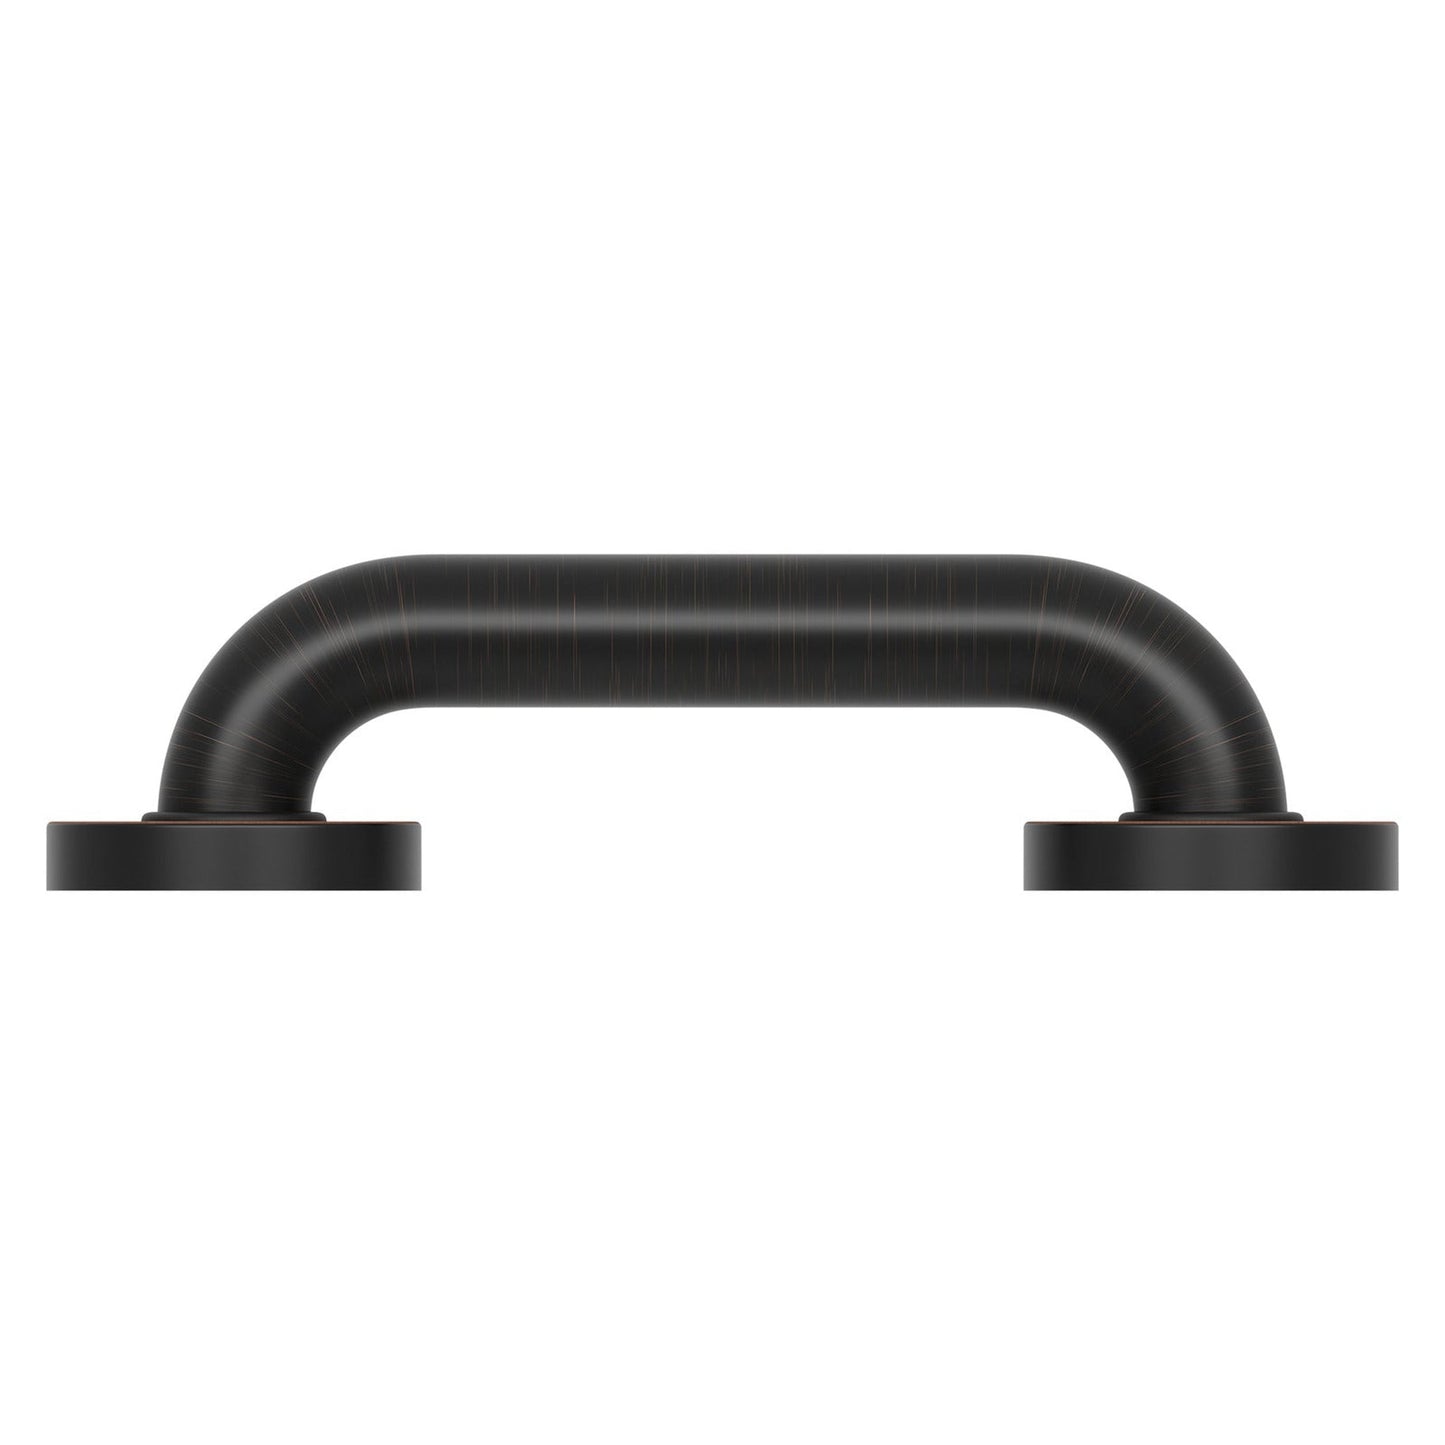 Evekare 8" x 1.25" Stainless Steel Concealed Mount Grab Bar in Oil Rubbed Bronze